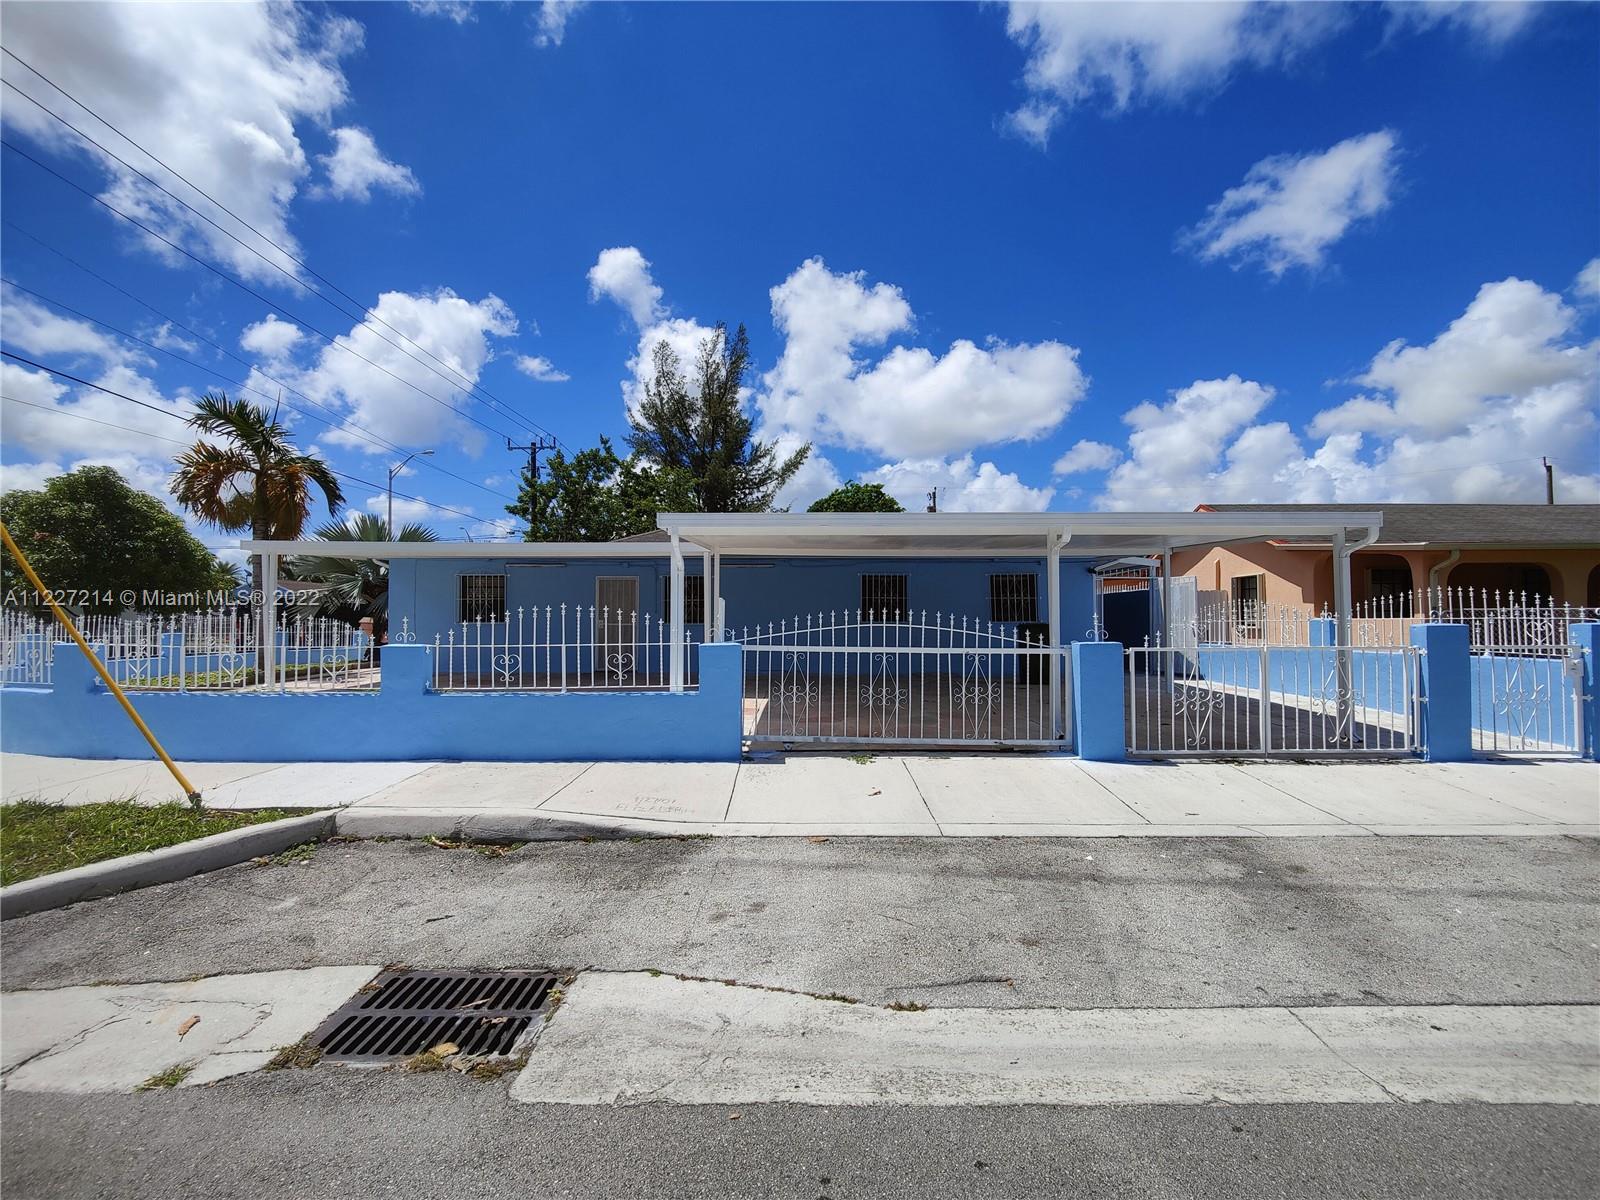 This 6 bedroom 3 bathroom home is move in ready! Spacious, unique corner home, centrally located in east Hialeah awaits the right buyer! Endless potential property can be use as multigenerational home for a large family or an income generating investment, using it as a 3/1, 2/1 and 1/1. Parking is plentiful with a covered carport (3 car) and a covered parking area for an RV and or boat. Close to it all - Miami International Airport, Coral Gables, Doral, Midtown and major expressways. Motivated Seller, bring your offers!